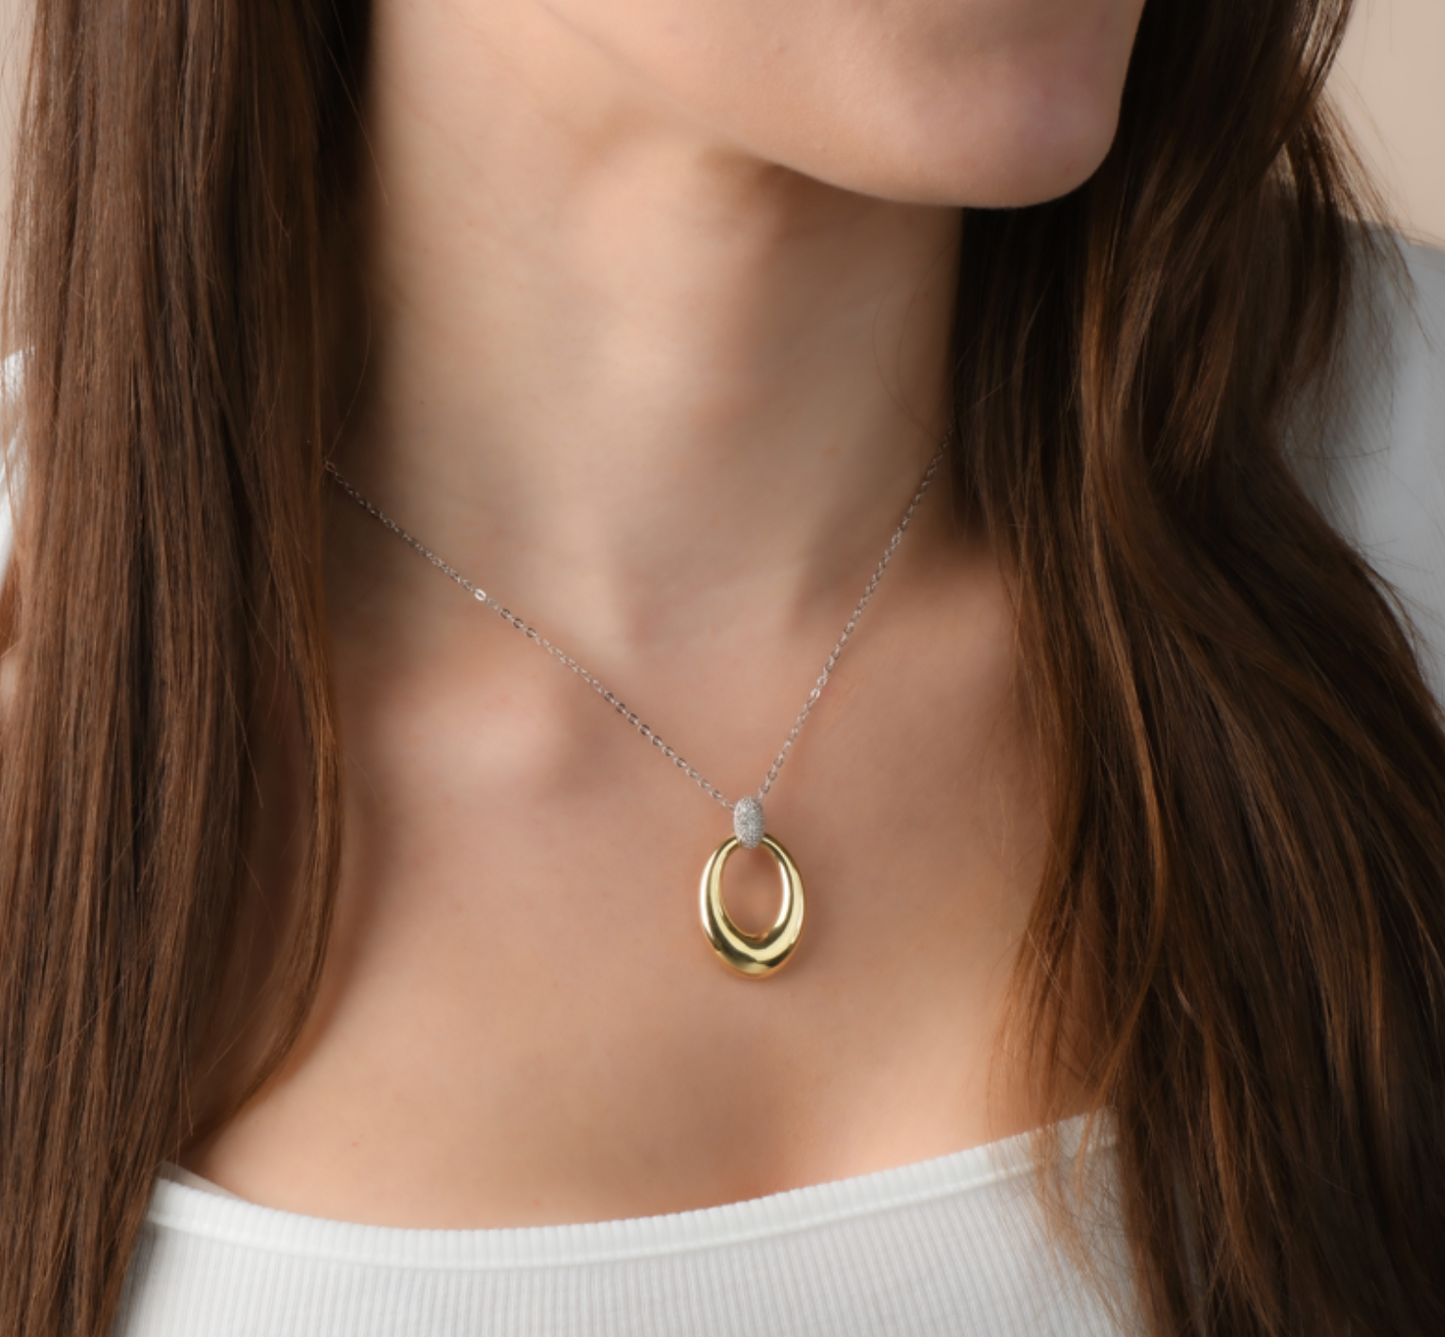 Knocker Pendant Necklace | Knocker Pendant with White Sapphires and Yellow Gold